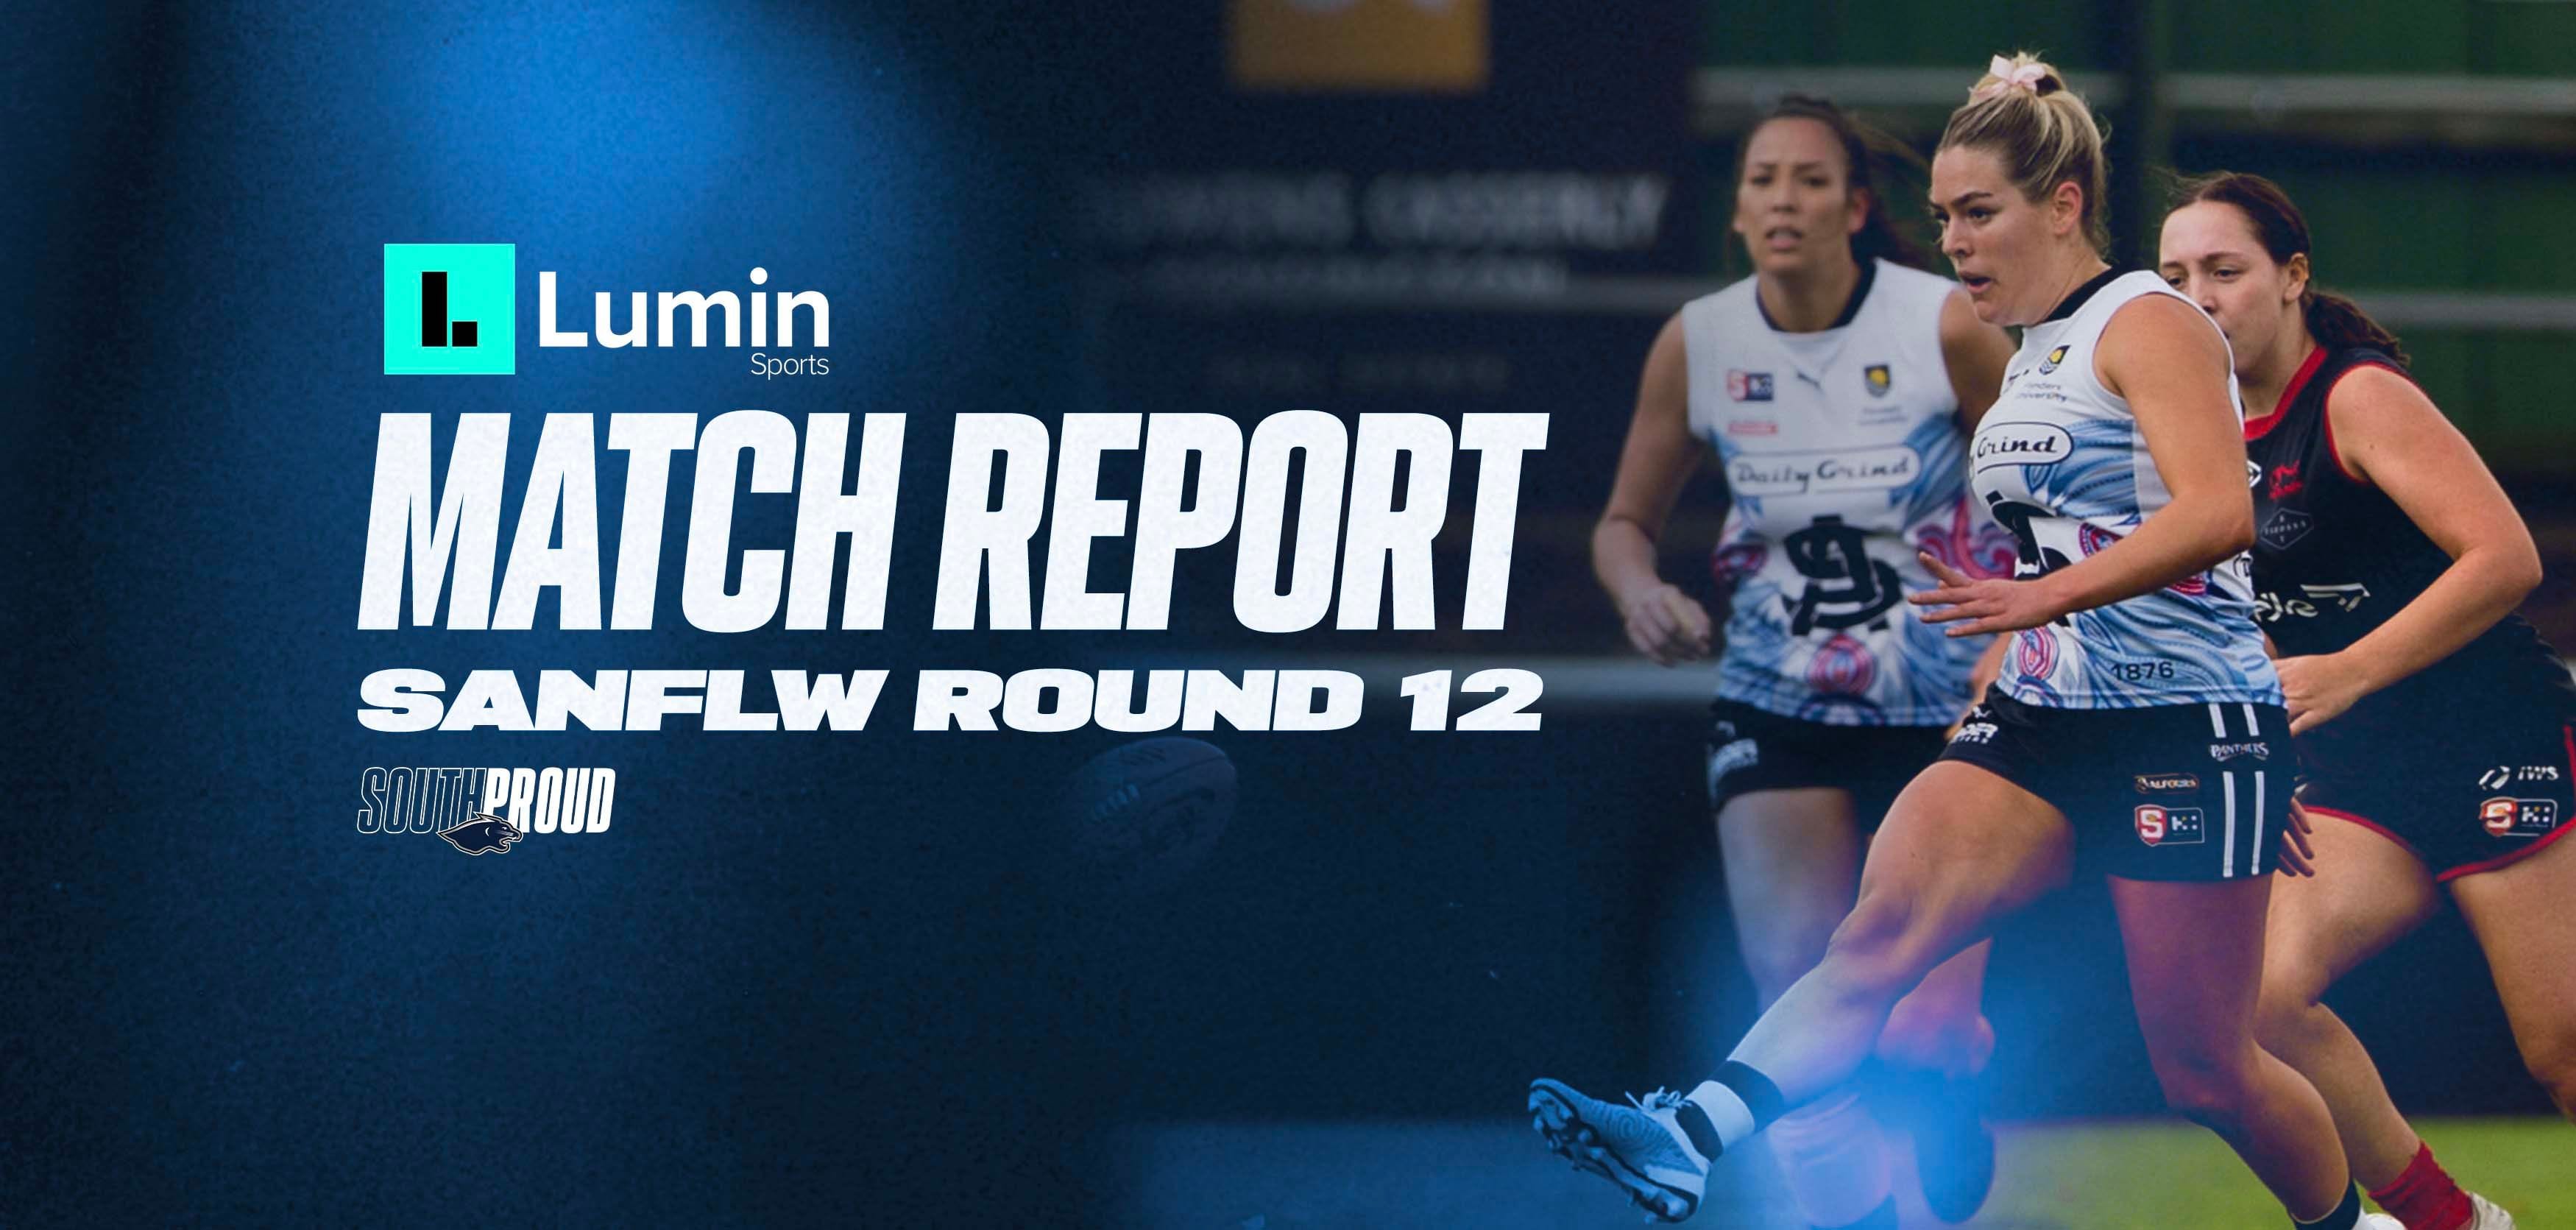 Daily Grind Match Report: Round 12 v Norwood